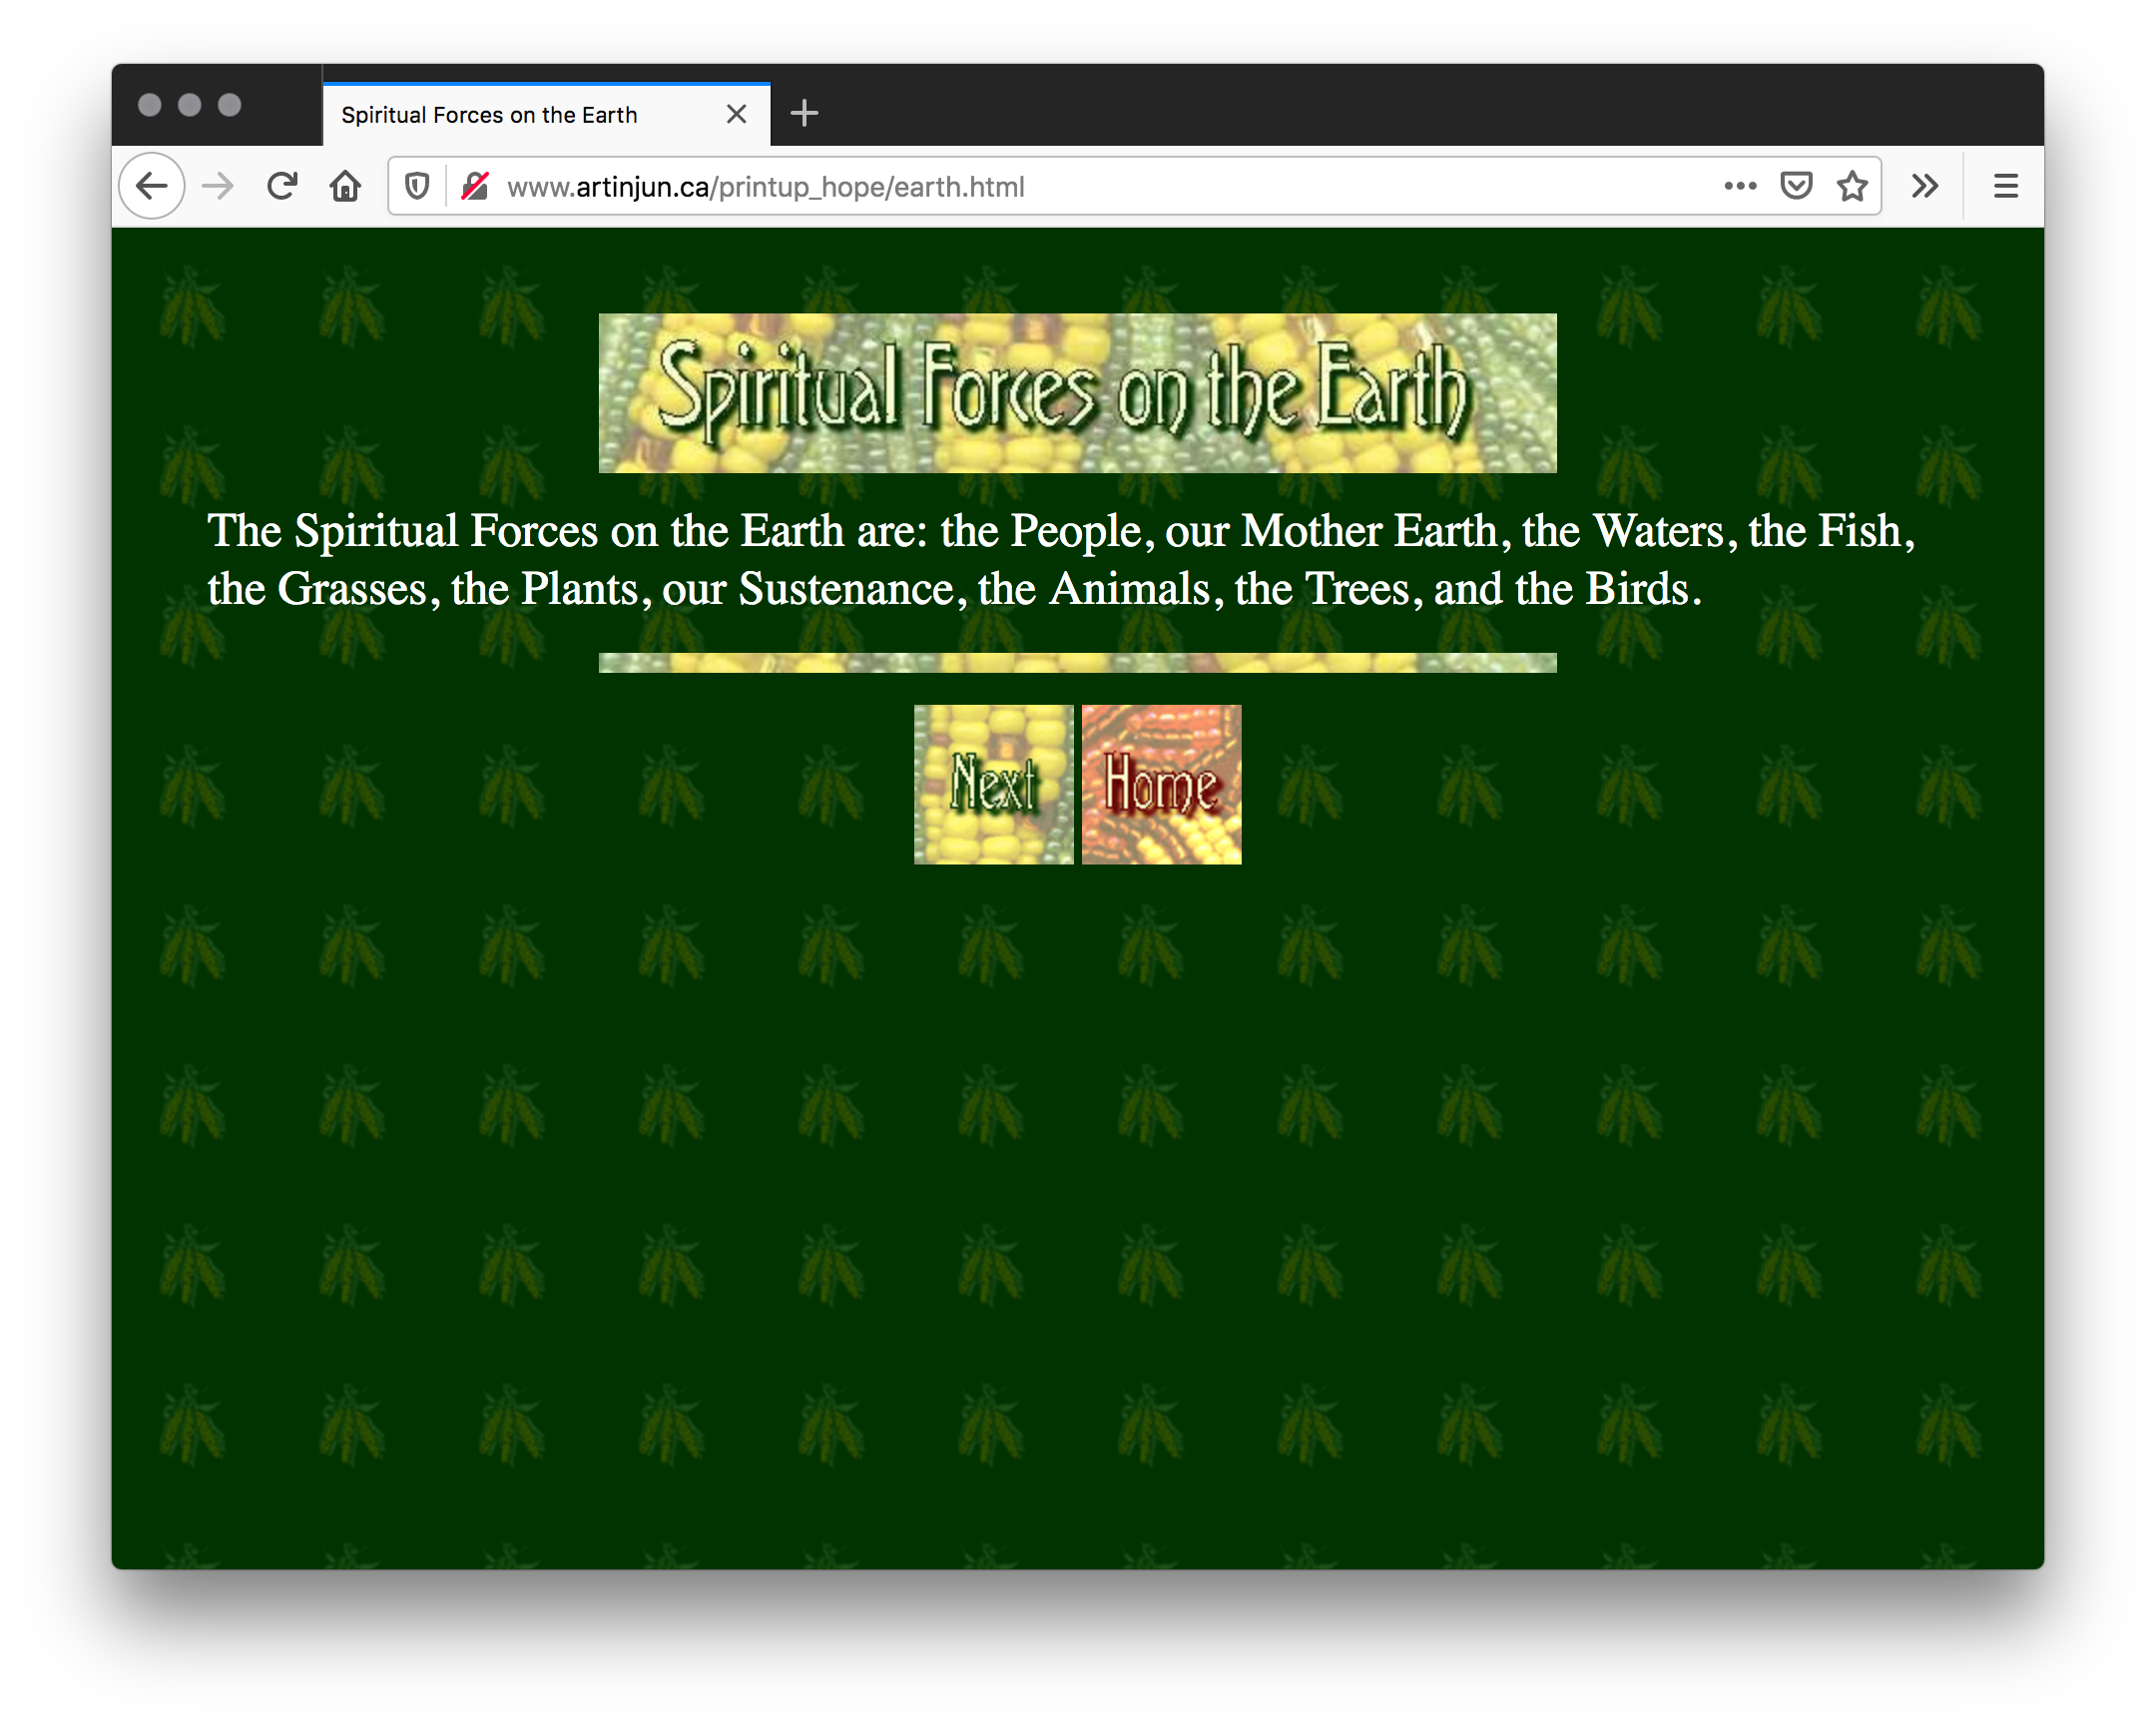 A webpage with two lines of white text and a banner with stalks of corn images and Spiritual Forces on the Earth as the title. Below are a "Next" and "Home" button in squares. The background is green with tiles of graphic corn stalks.